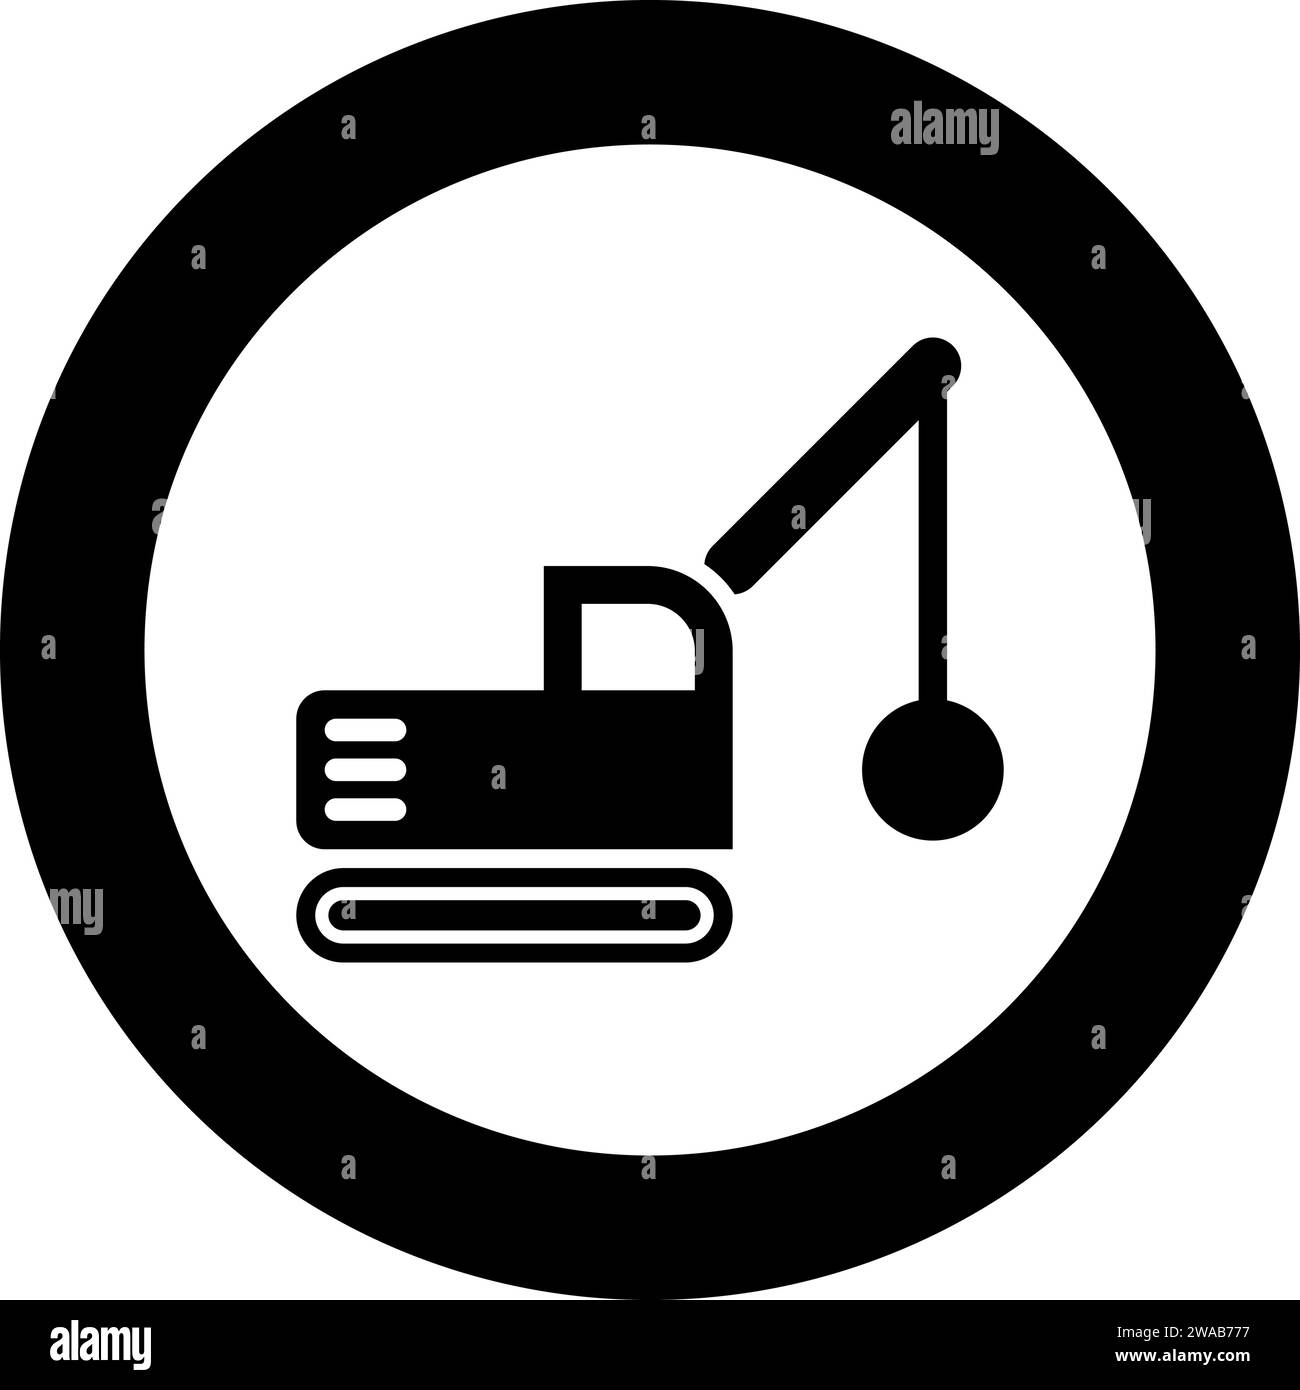 Sloopkraan building machine demolish wrecking ball crane truck icon in circle round black color vector illustration image solid outline style simple Stock Vector